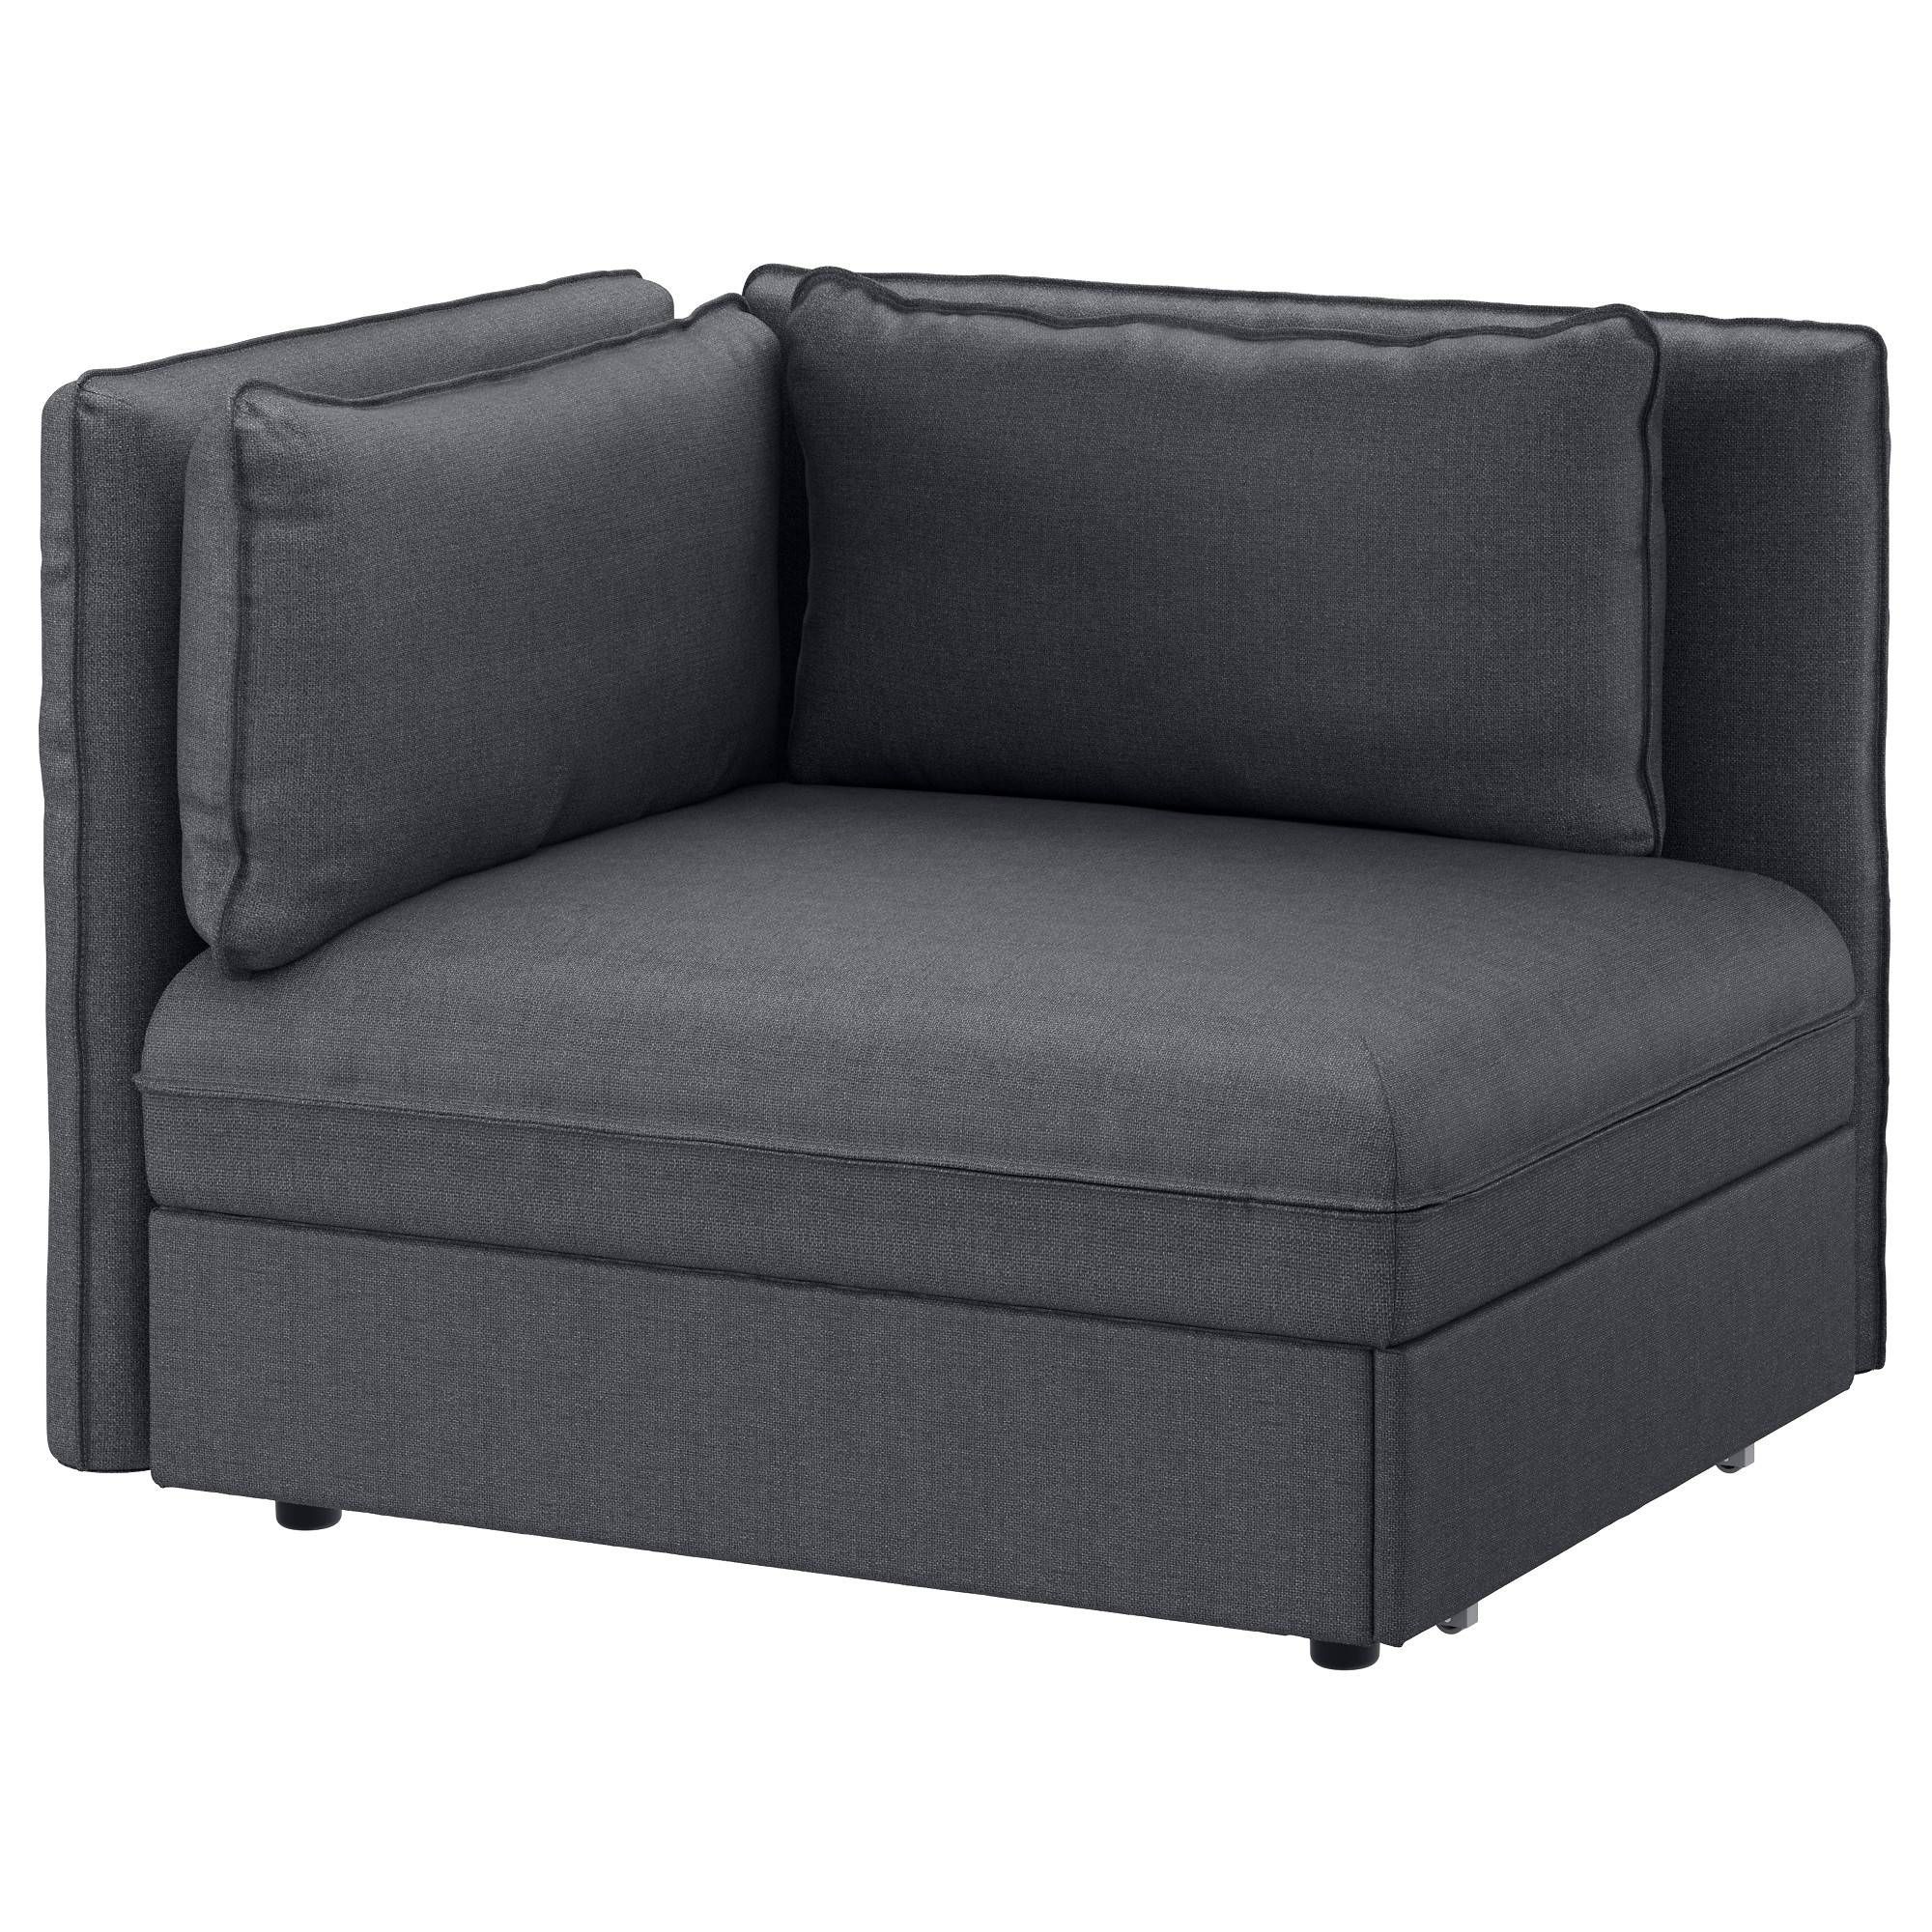 Sofas Center : Sofa Chair Single At Walmart Chairs For Sale Best With Folding Sofa Chairs (Photo 9 of 30)